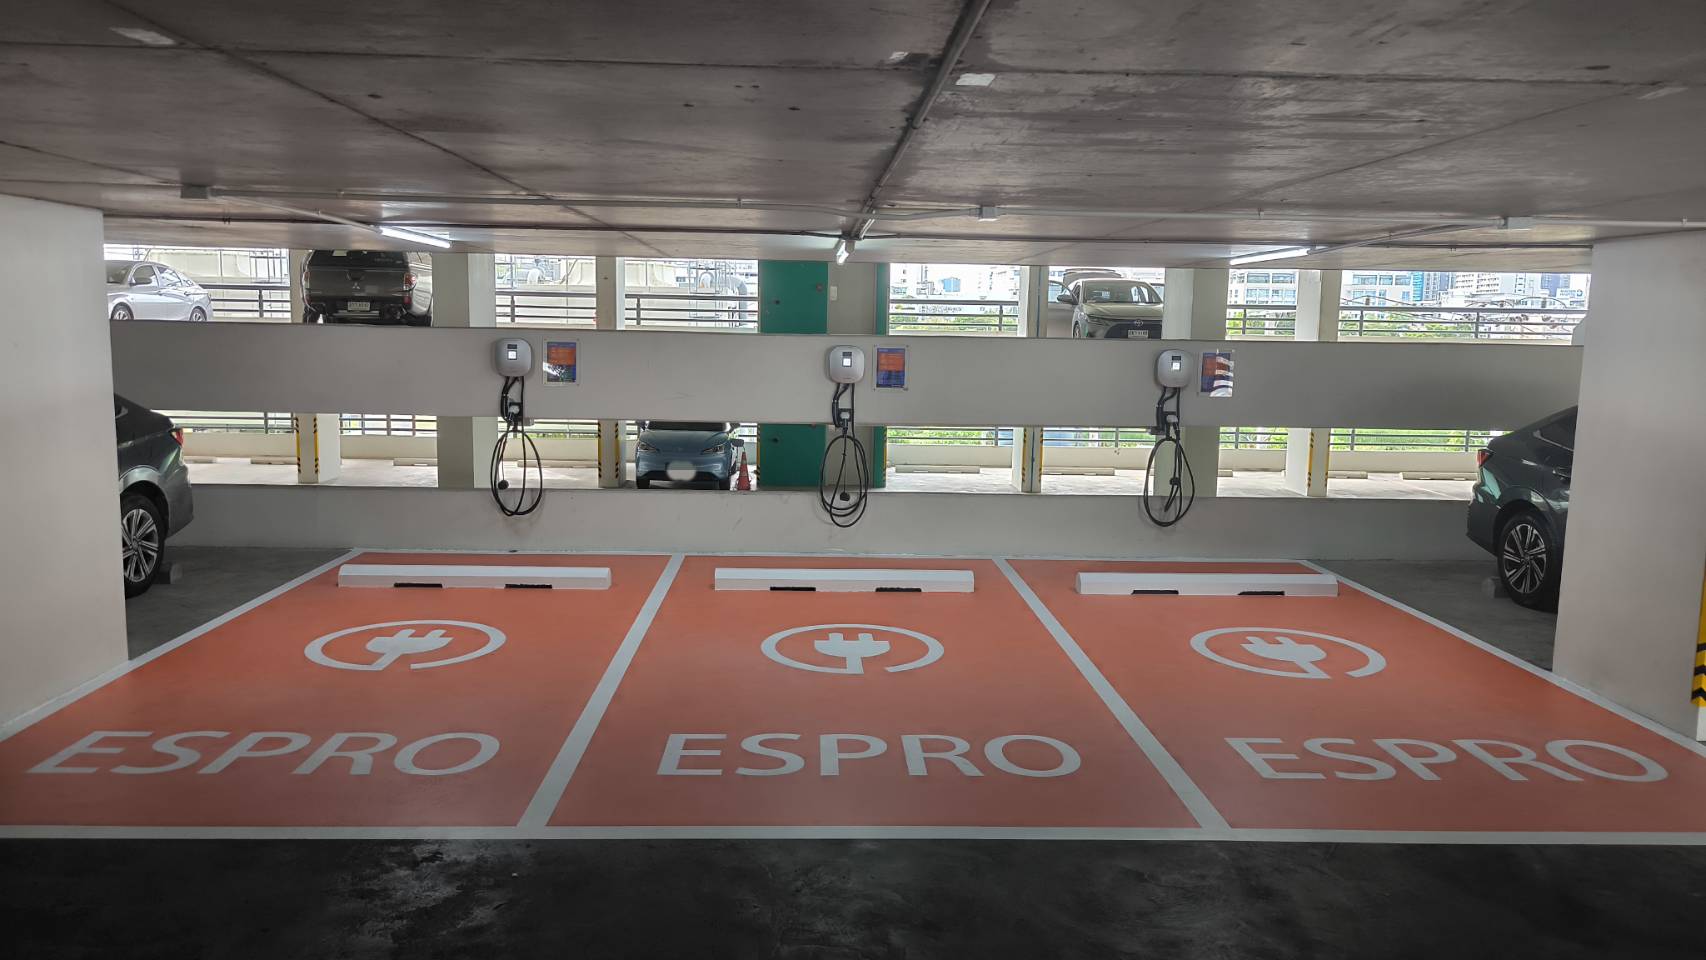 A parking Ev Charge garage with two cars parked inside.